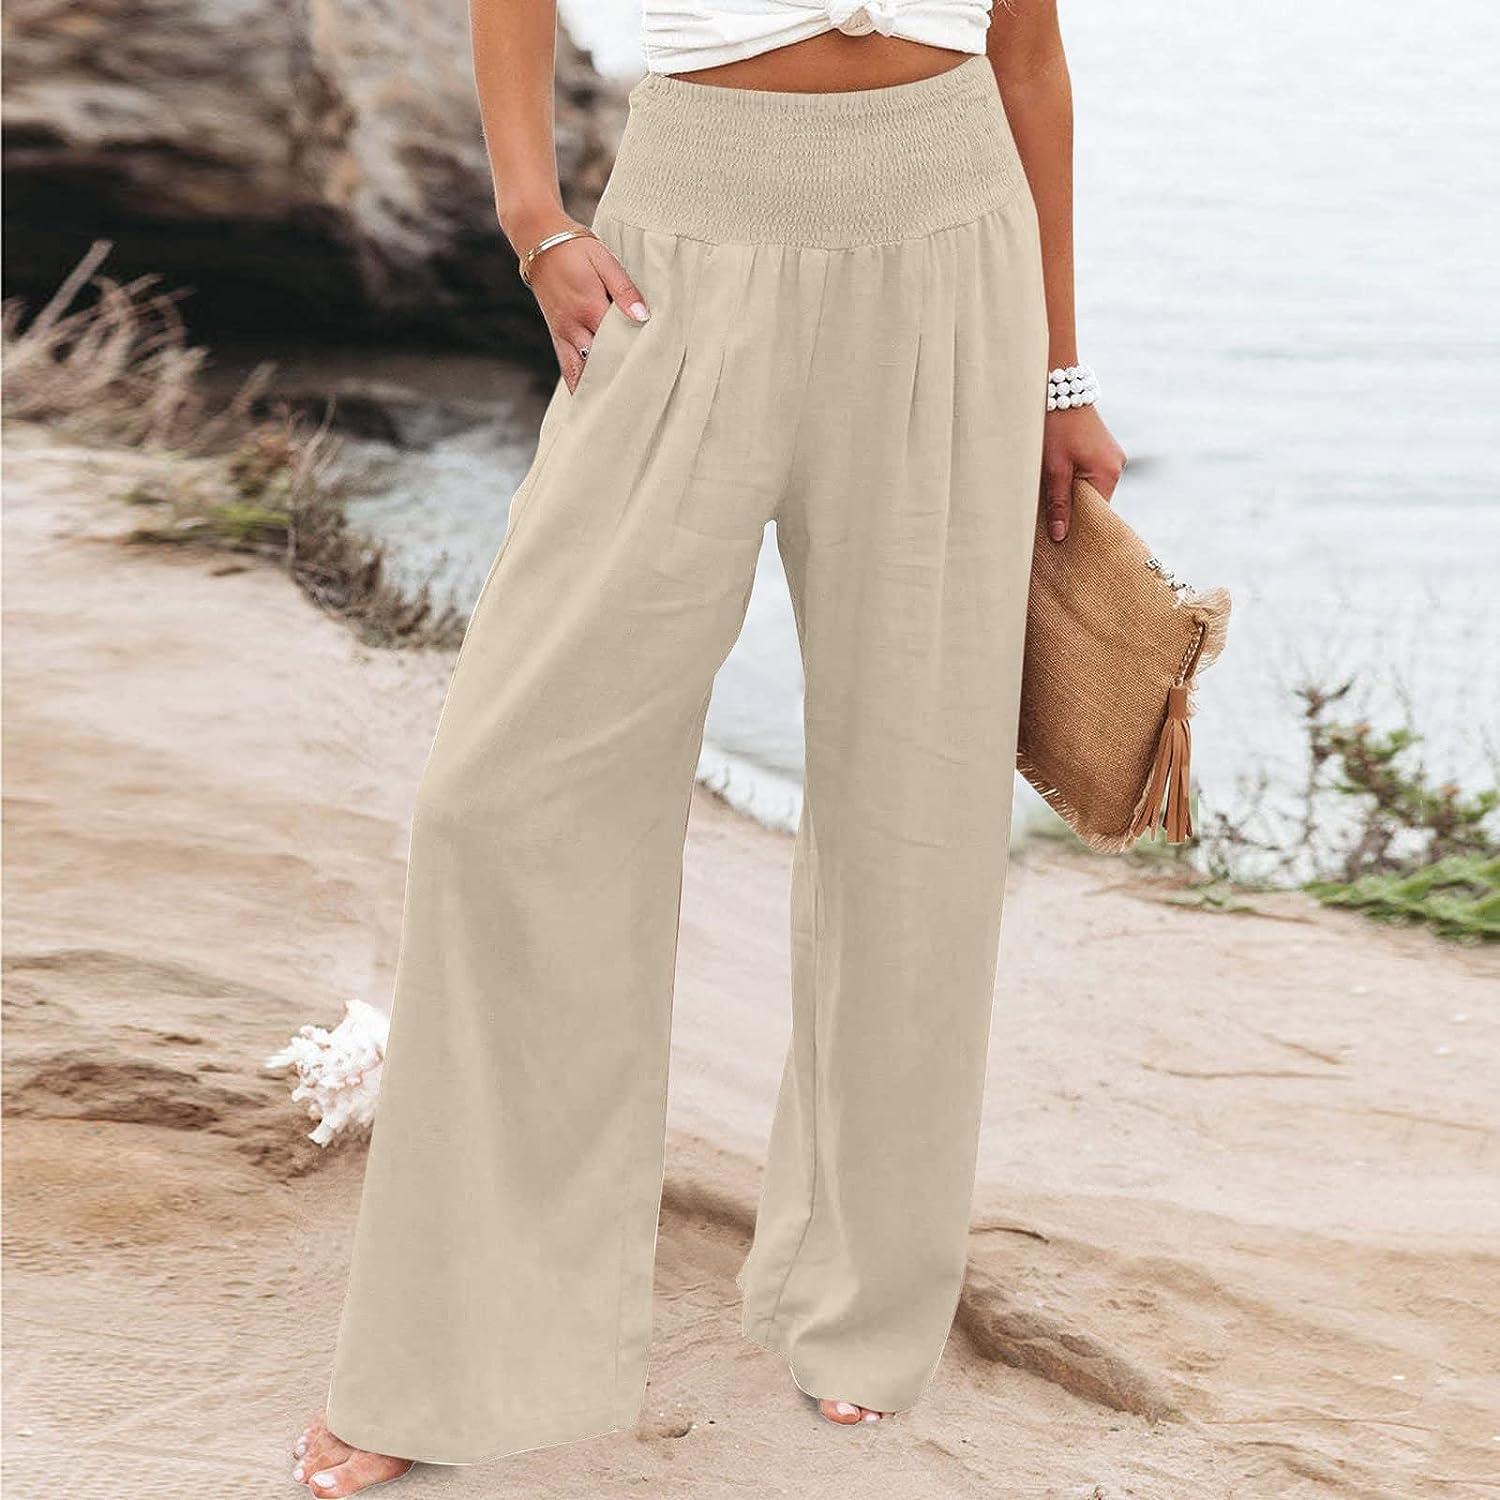 JEGULV Linen Pants for Women Casual Summer High Waist Wide Leg Palazzo Lounge  Pants Solid Baggy Pant Trousers with Pocket D01#khaki Large